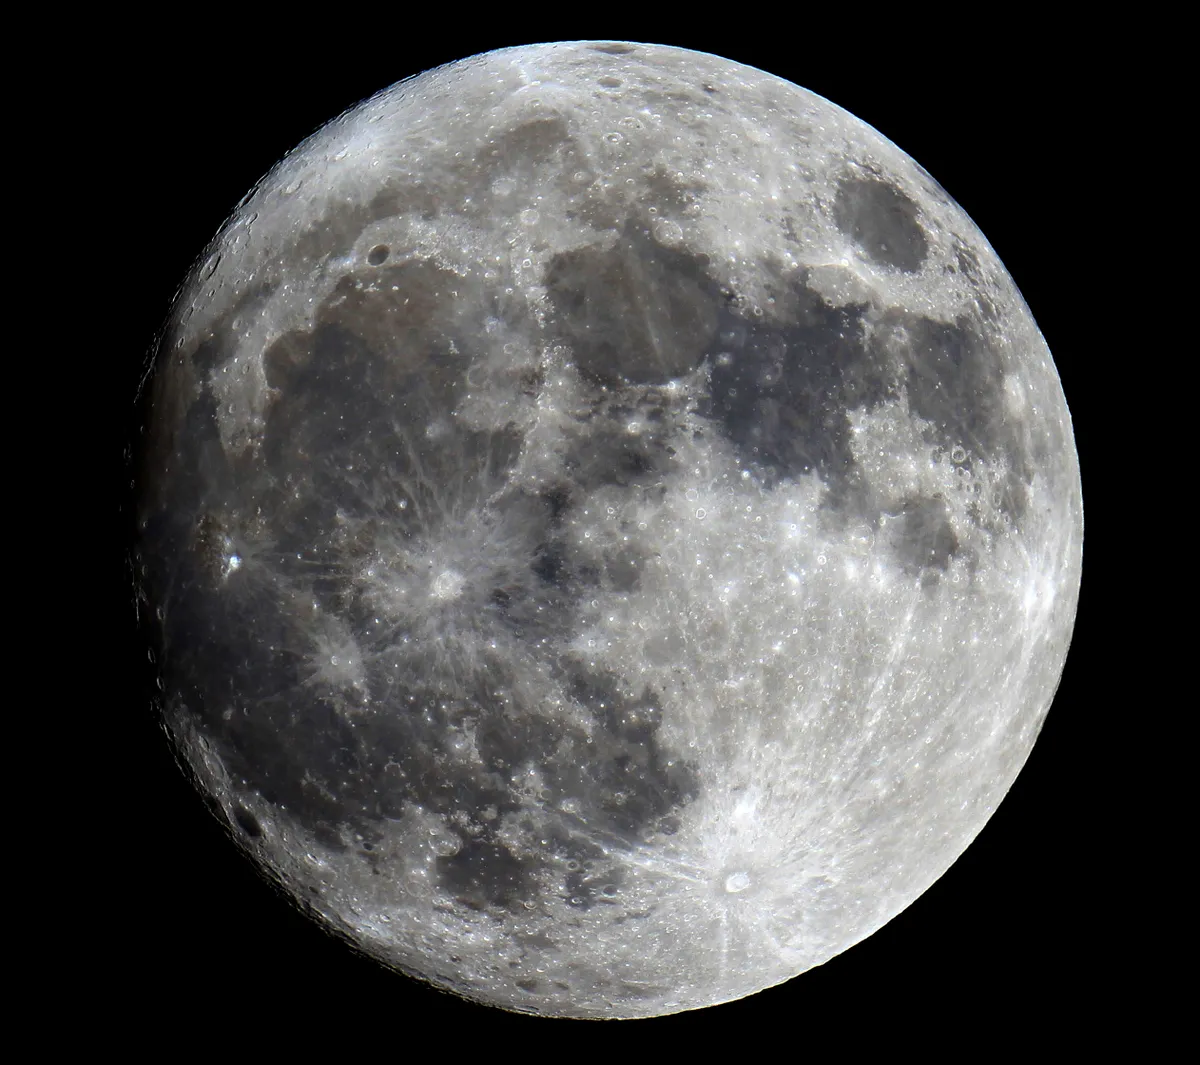 Moon by Andrew Merrick, Newgale, Haverfordwest, Pembrokeshire, Wales. Equipment: Canon 550d, Williams Optics 120 refractor, EQ6.